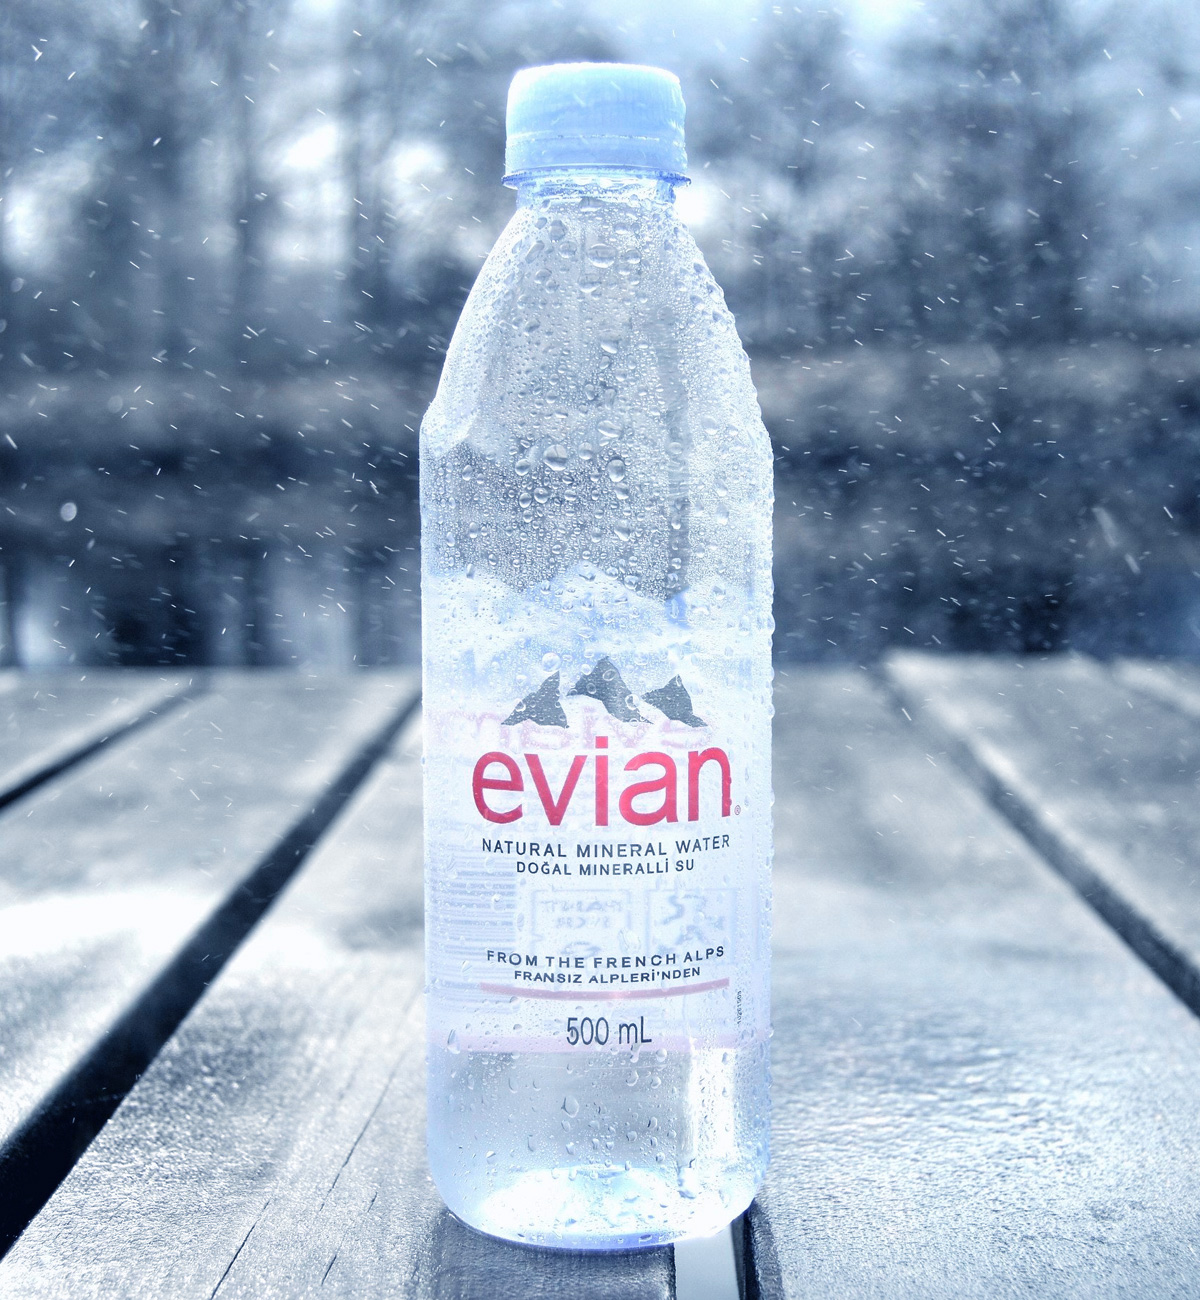 https://groupex.com/evian-water-is-now-available-at-pepsico/